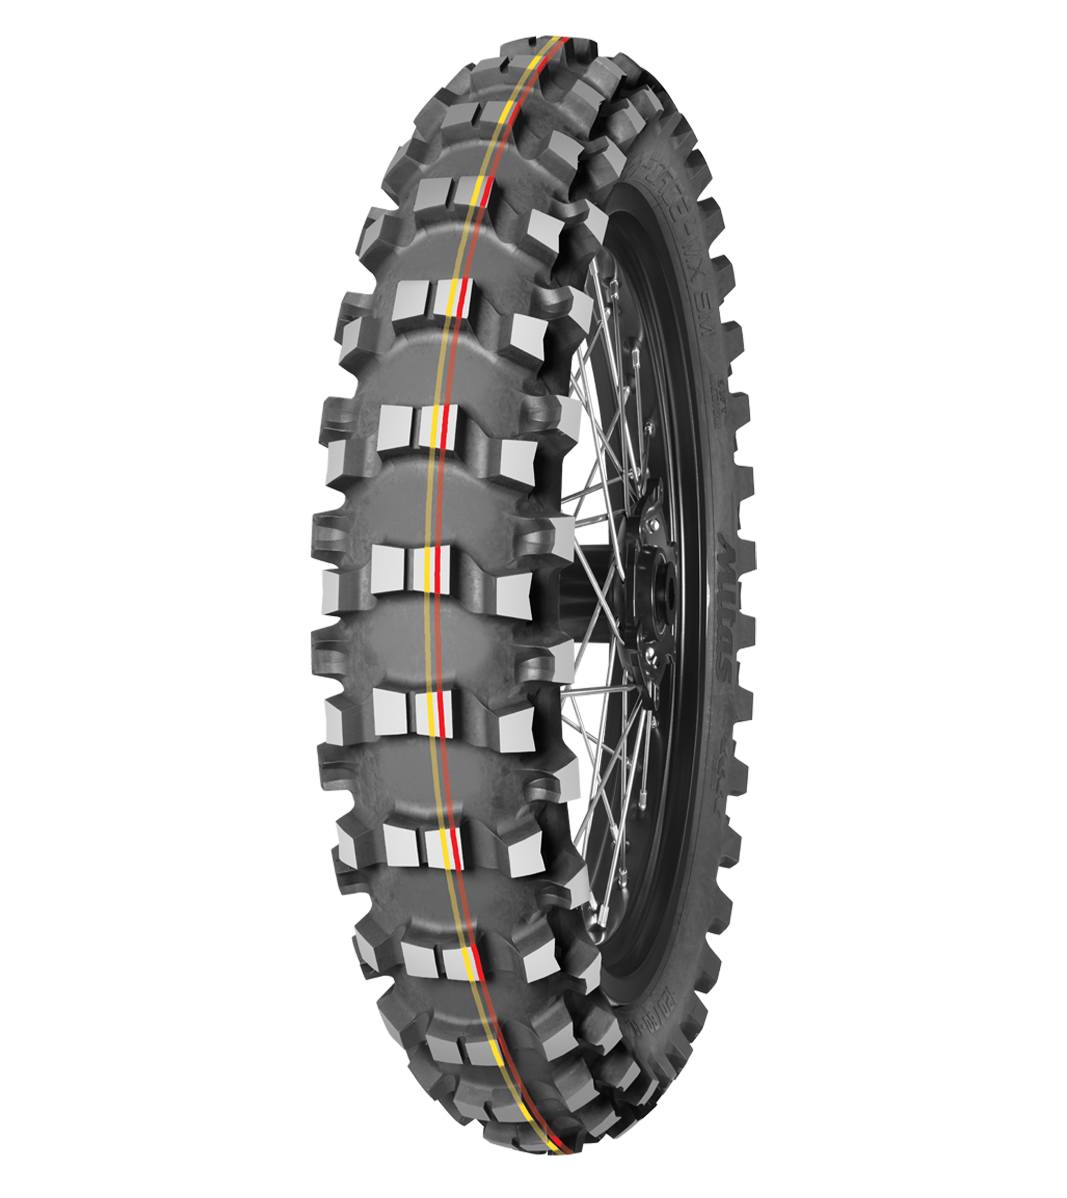 Mitas TERRA FORCE-MX SM 120/80-19 Motocross Competition Off-Road SOFT TO MEDIUM 63M Red & Yellow Tube Rear Tire, 226519, 120/80-19, Motocross, Motocross Competition, Off-Road, Rear, Terra Force, Terra Force-MX SM, Trail, Tires - Imported and distributed in North & South America by Lindeco Genuine Powersports - Premier Powersports Equipment and Accessories for Motorcycle Enthusiasts, Professional Riders and Dealers.